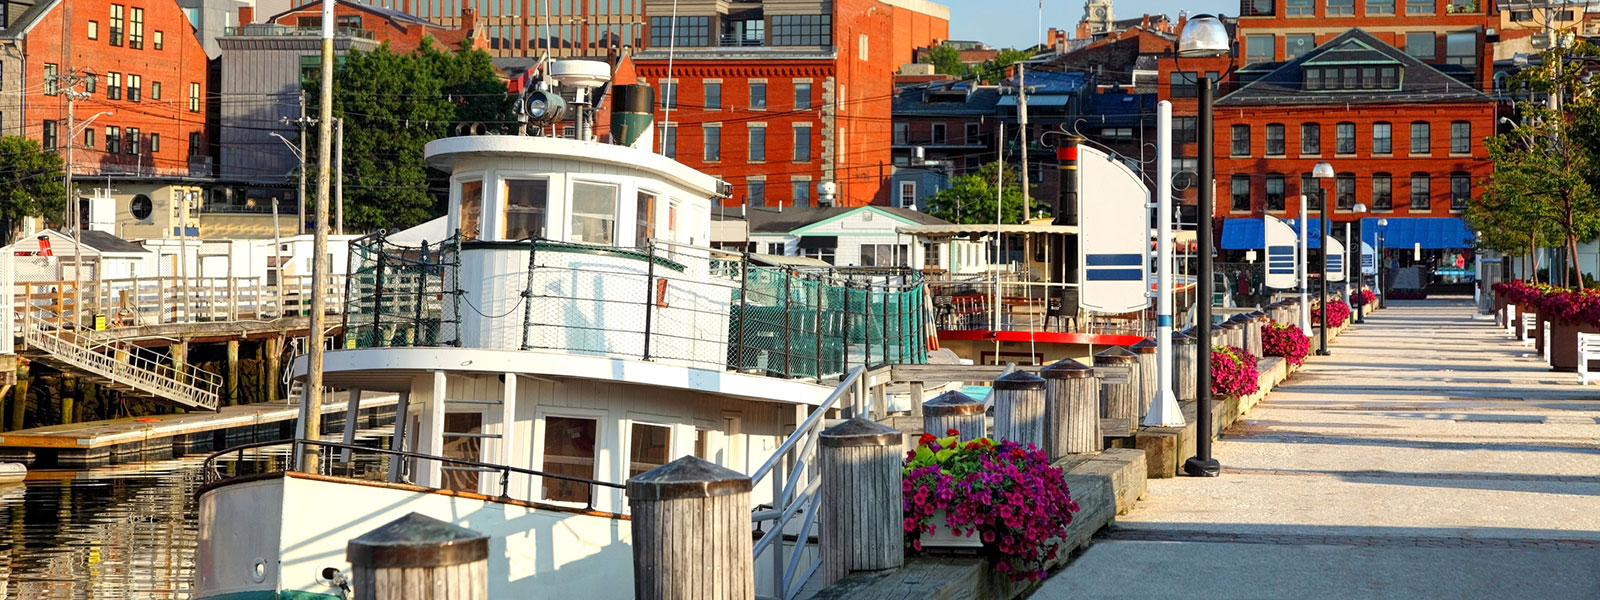 port of portland, maine with beautiful flowers and historic architecture